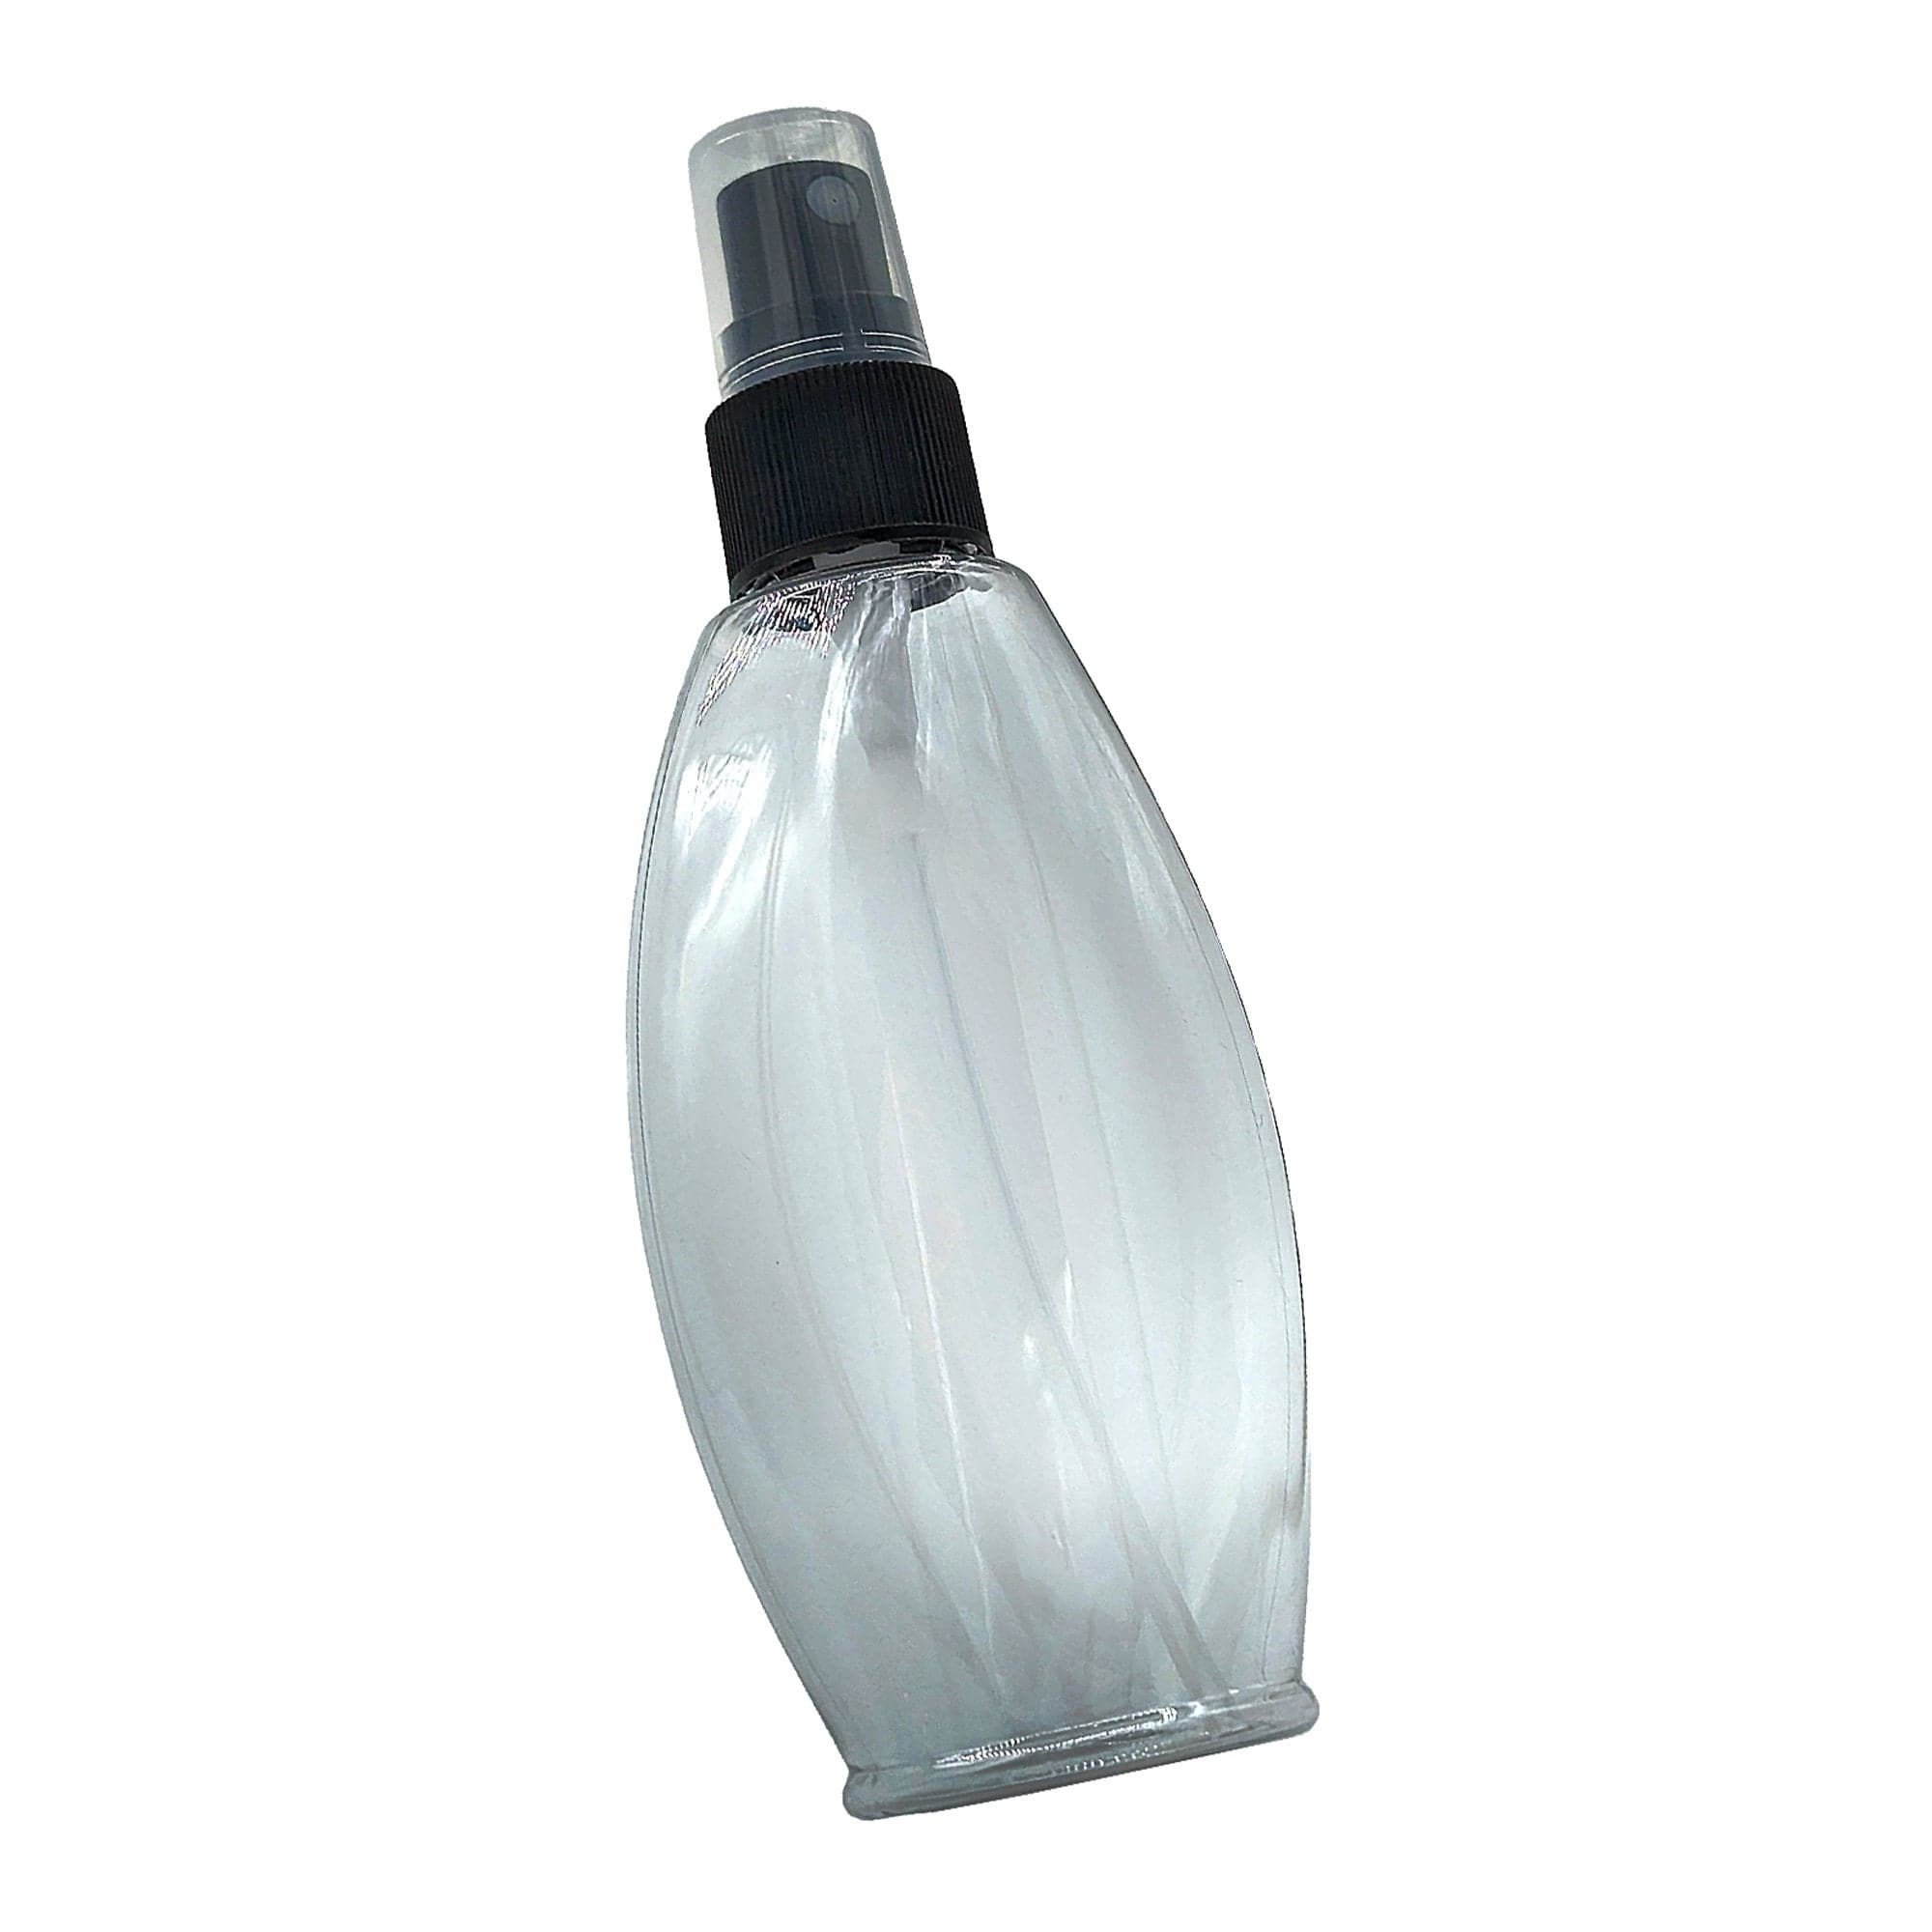 Eson - Hair Water Spray Bottle 100ml Empty Portable Travel Size (Clear)